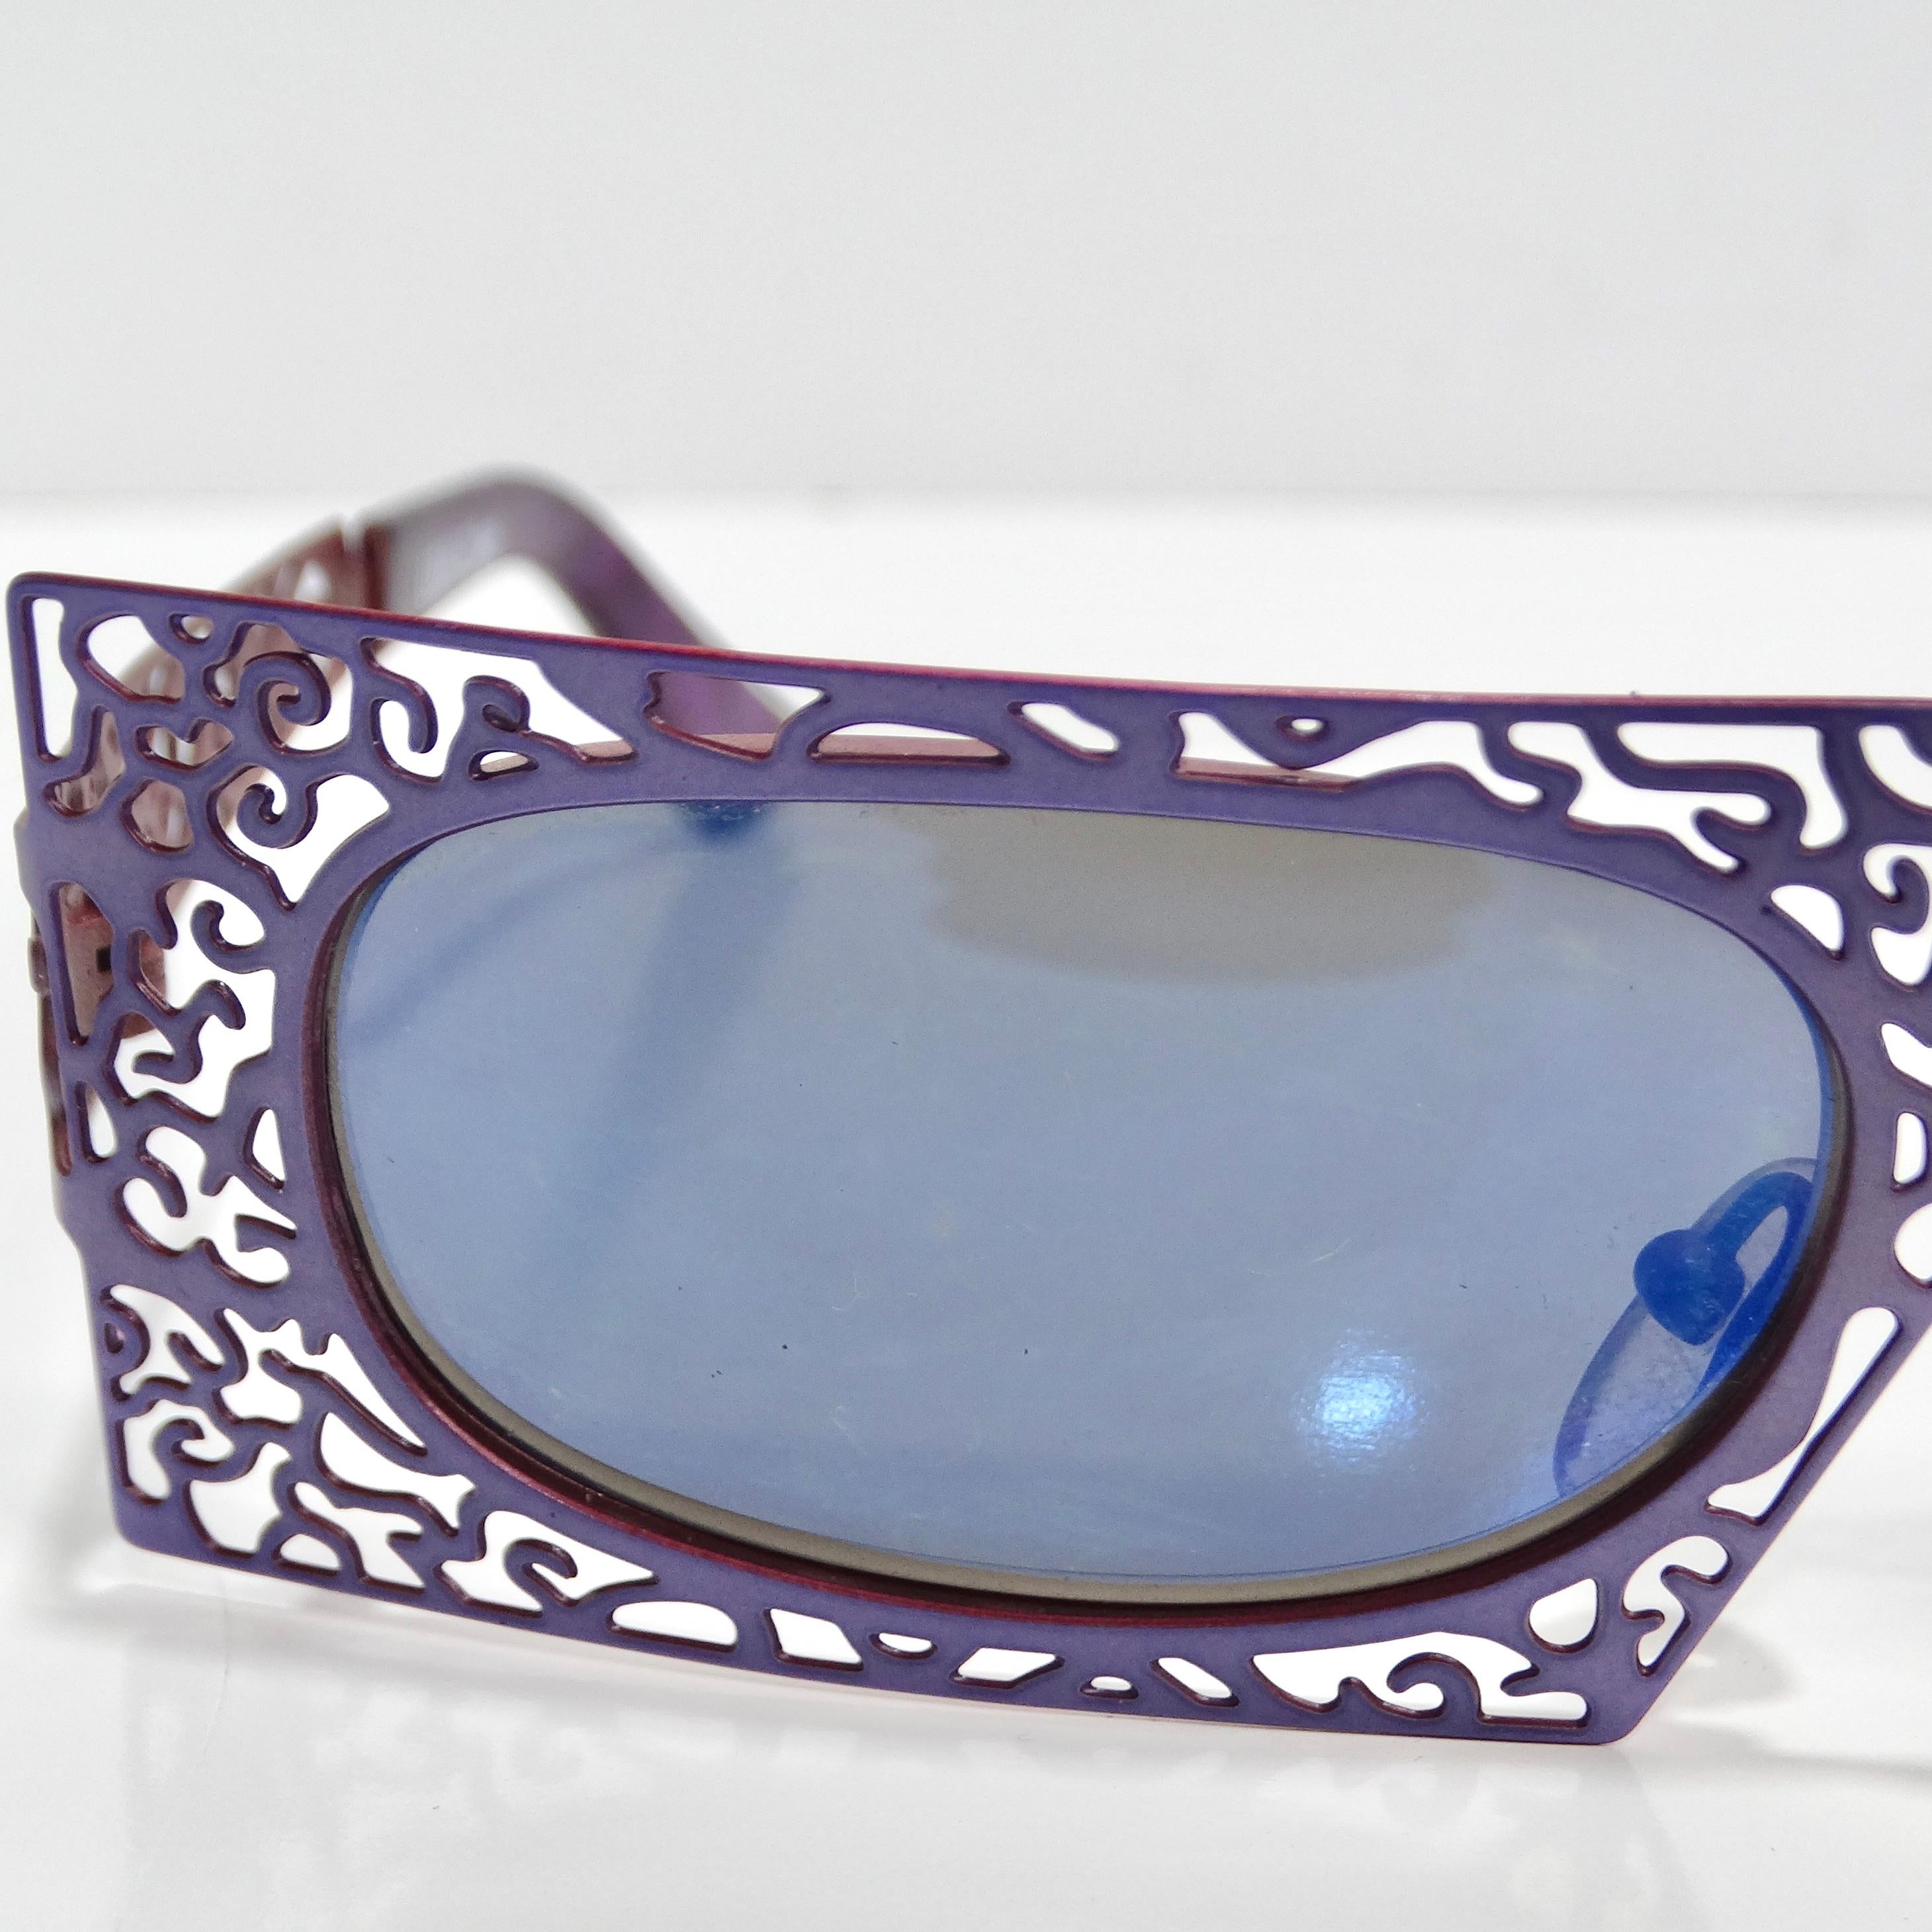 Introducing the Urbani Venice Purple Laser Cut Sunglasses, a stunning pair of statement sunglasses that exude vintage charm and contemporary flair. Crafted in the 1980s, these sunglasses are a true testament to timeless style and bold design.

These